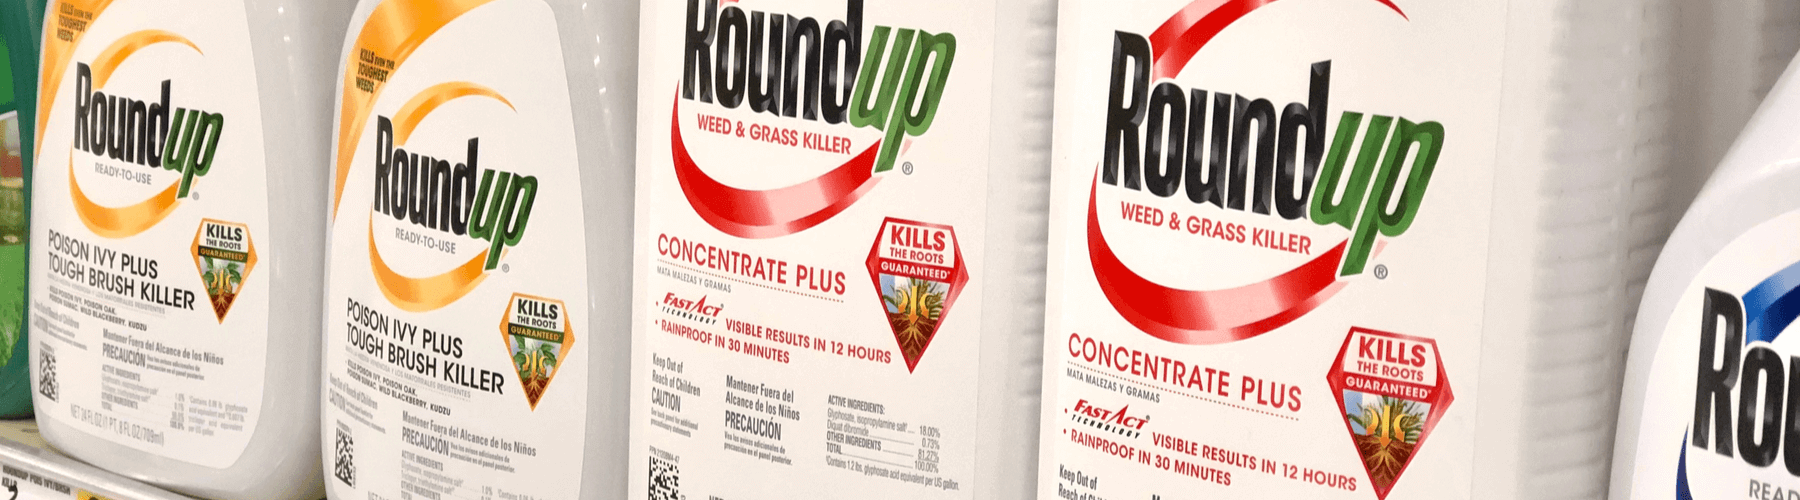 Wide view of Roundup bottles on a shelf in a store